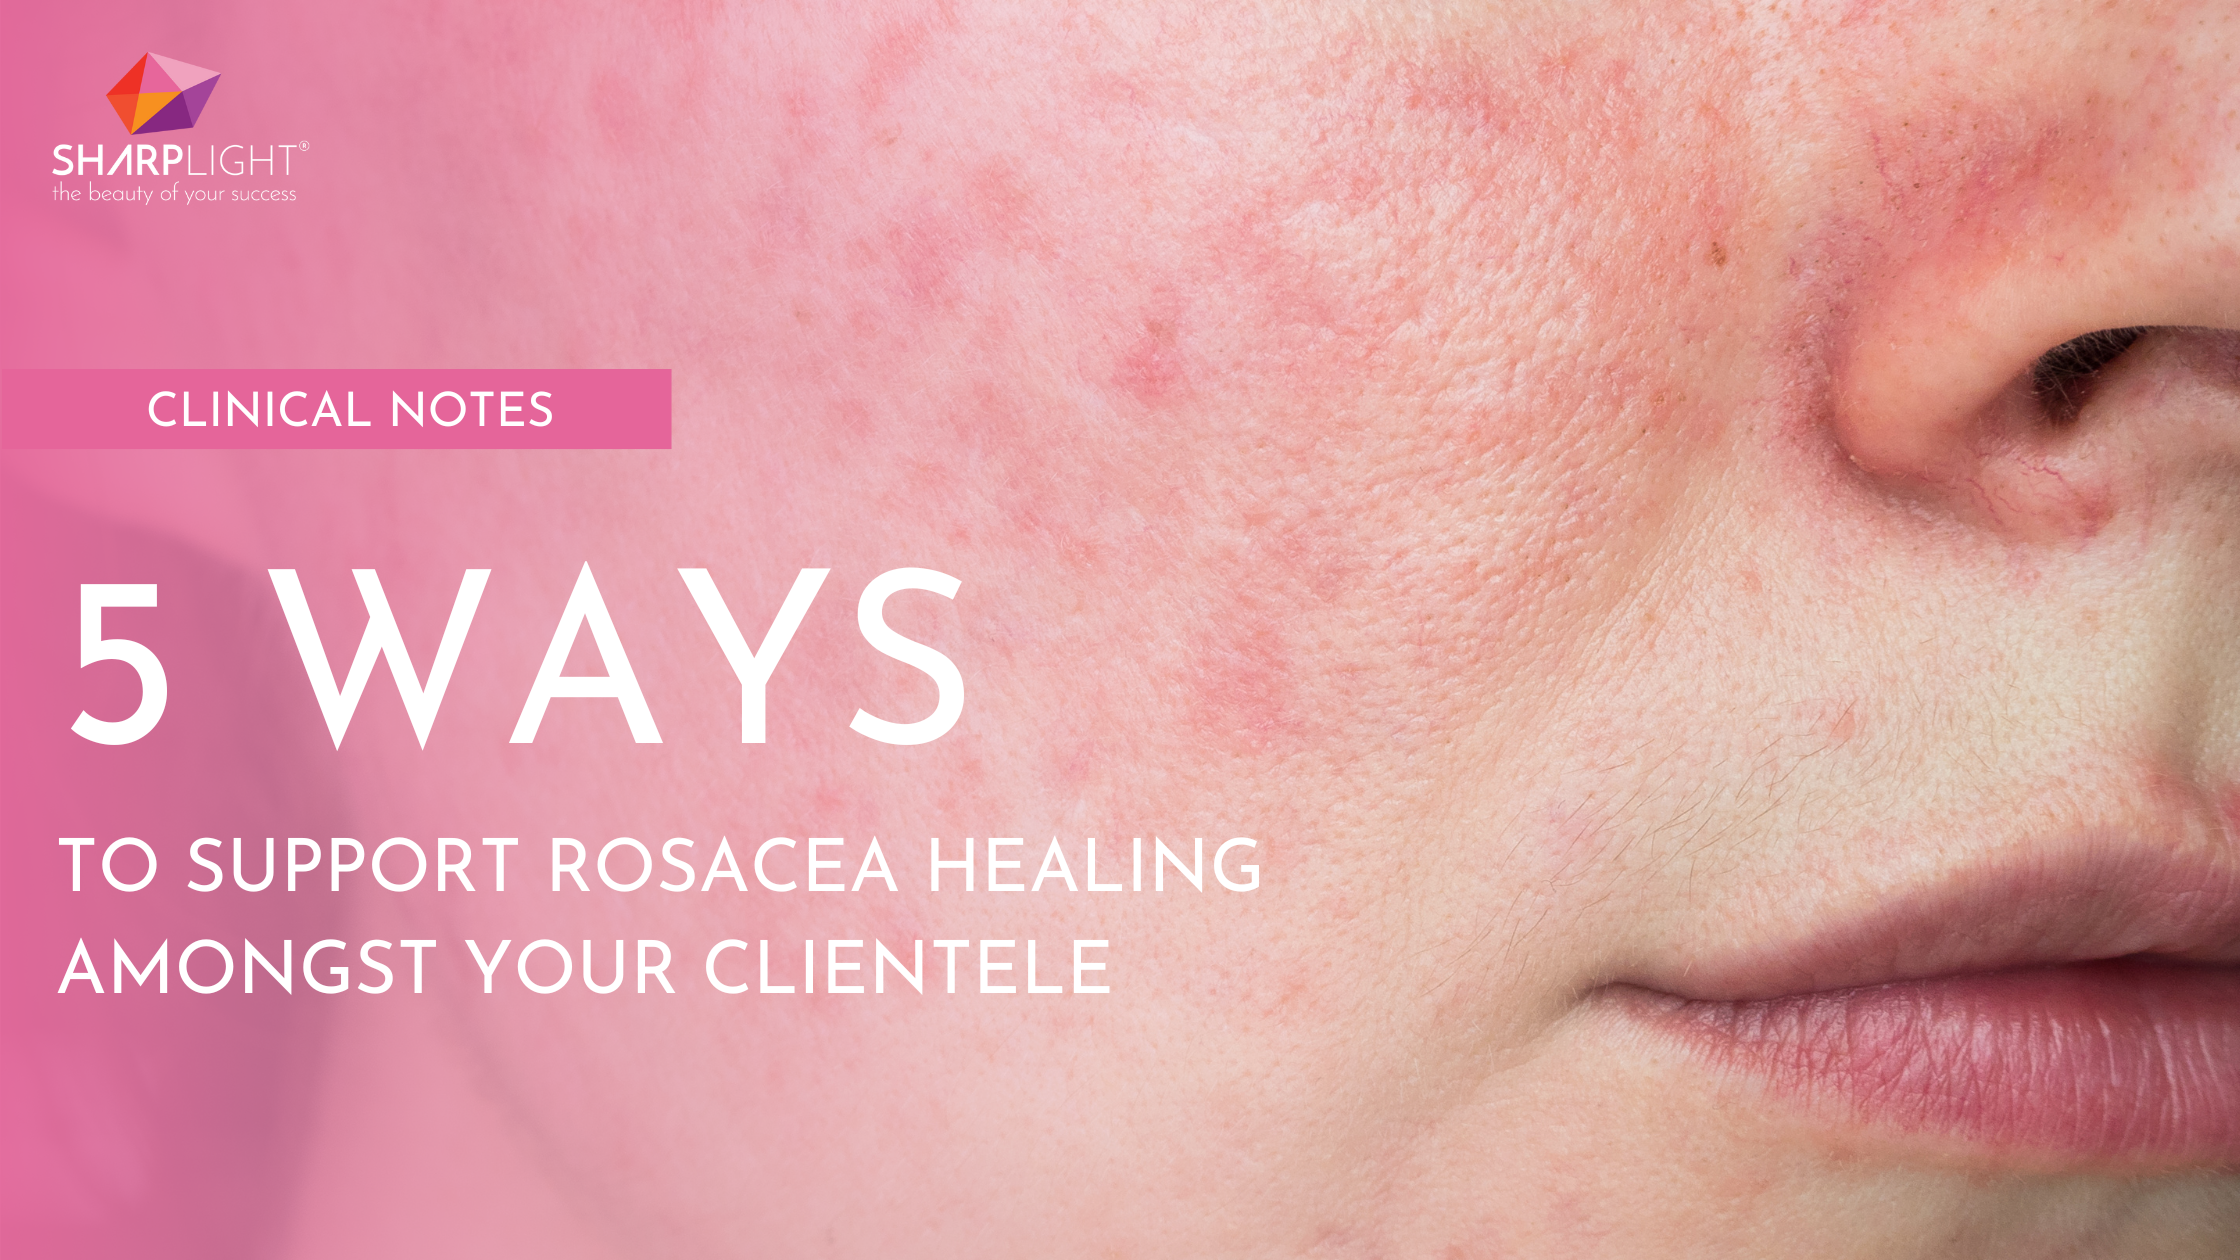 <h1>Clinical Notes: 5 Ways to Support Rosacea Healing Amongst Your Clientele </h1>